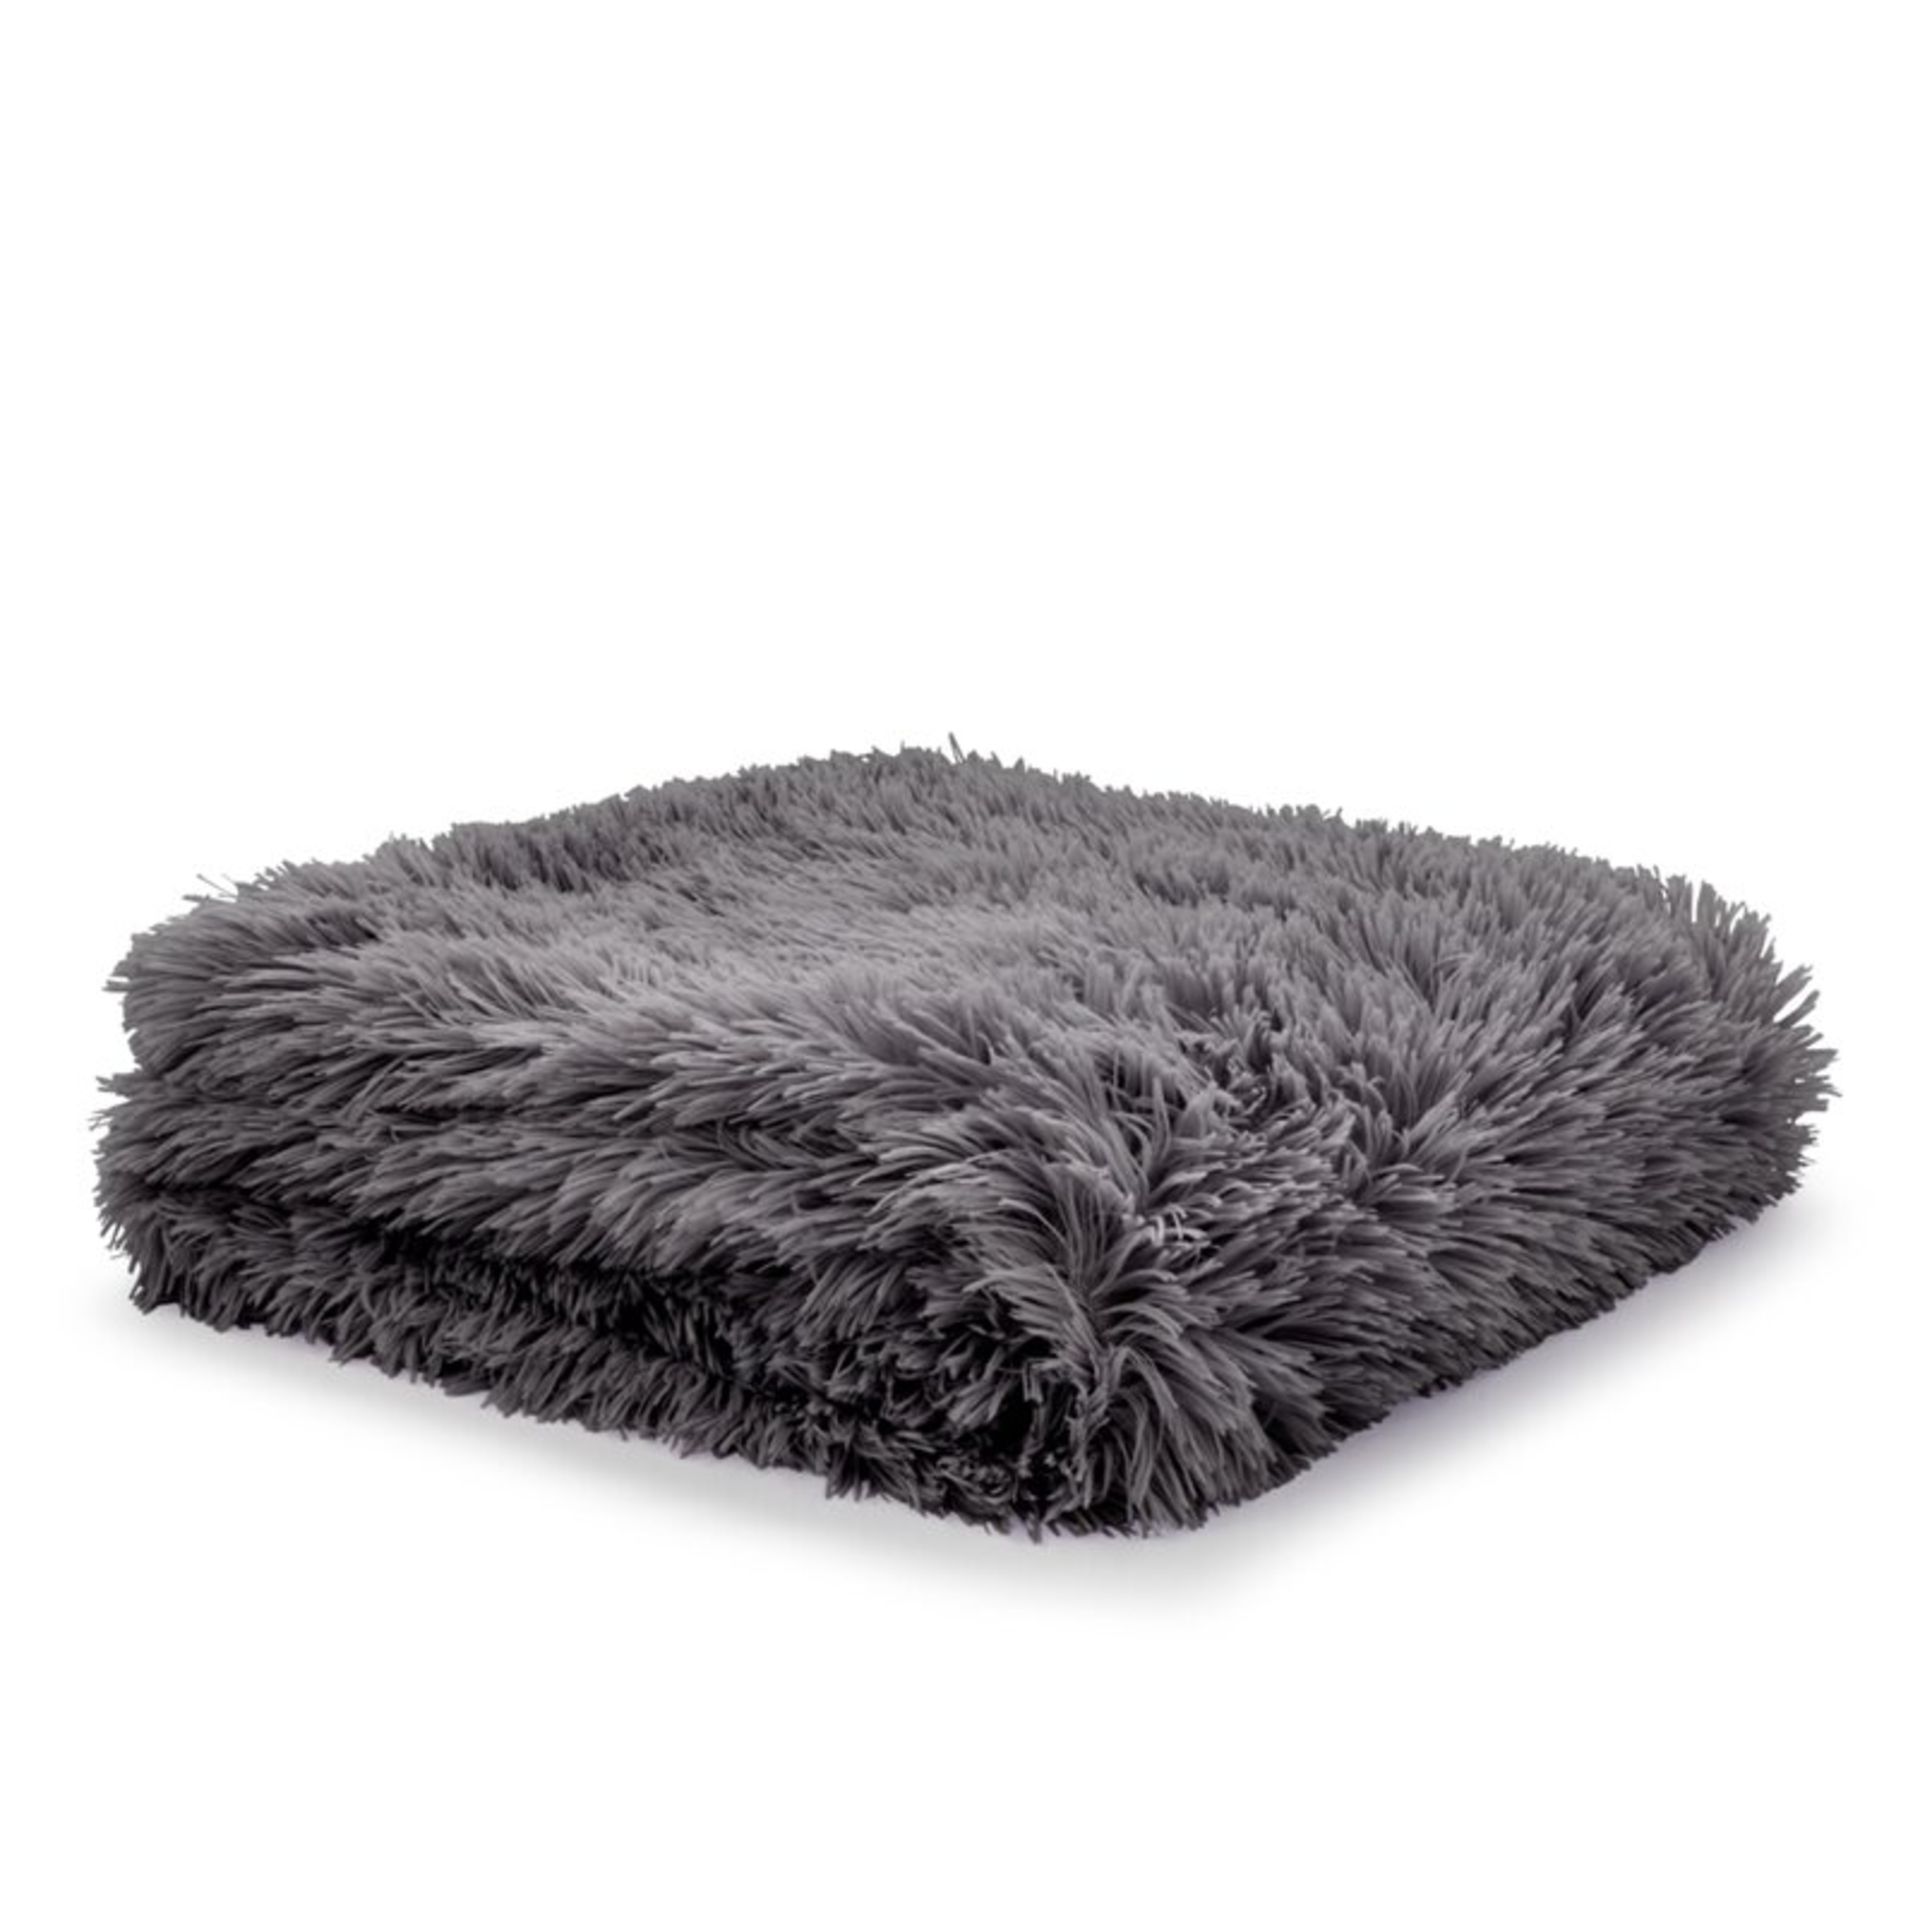 Cuddly Throw - RRP £32.50